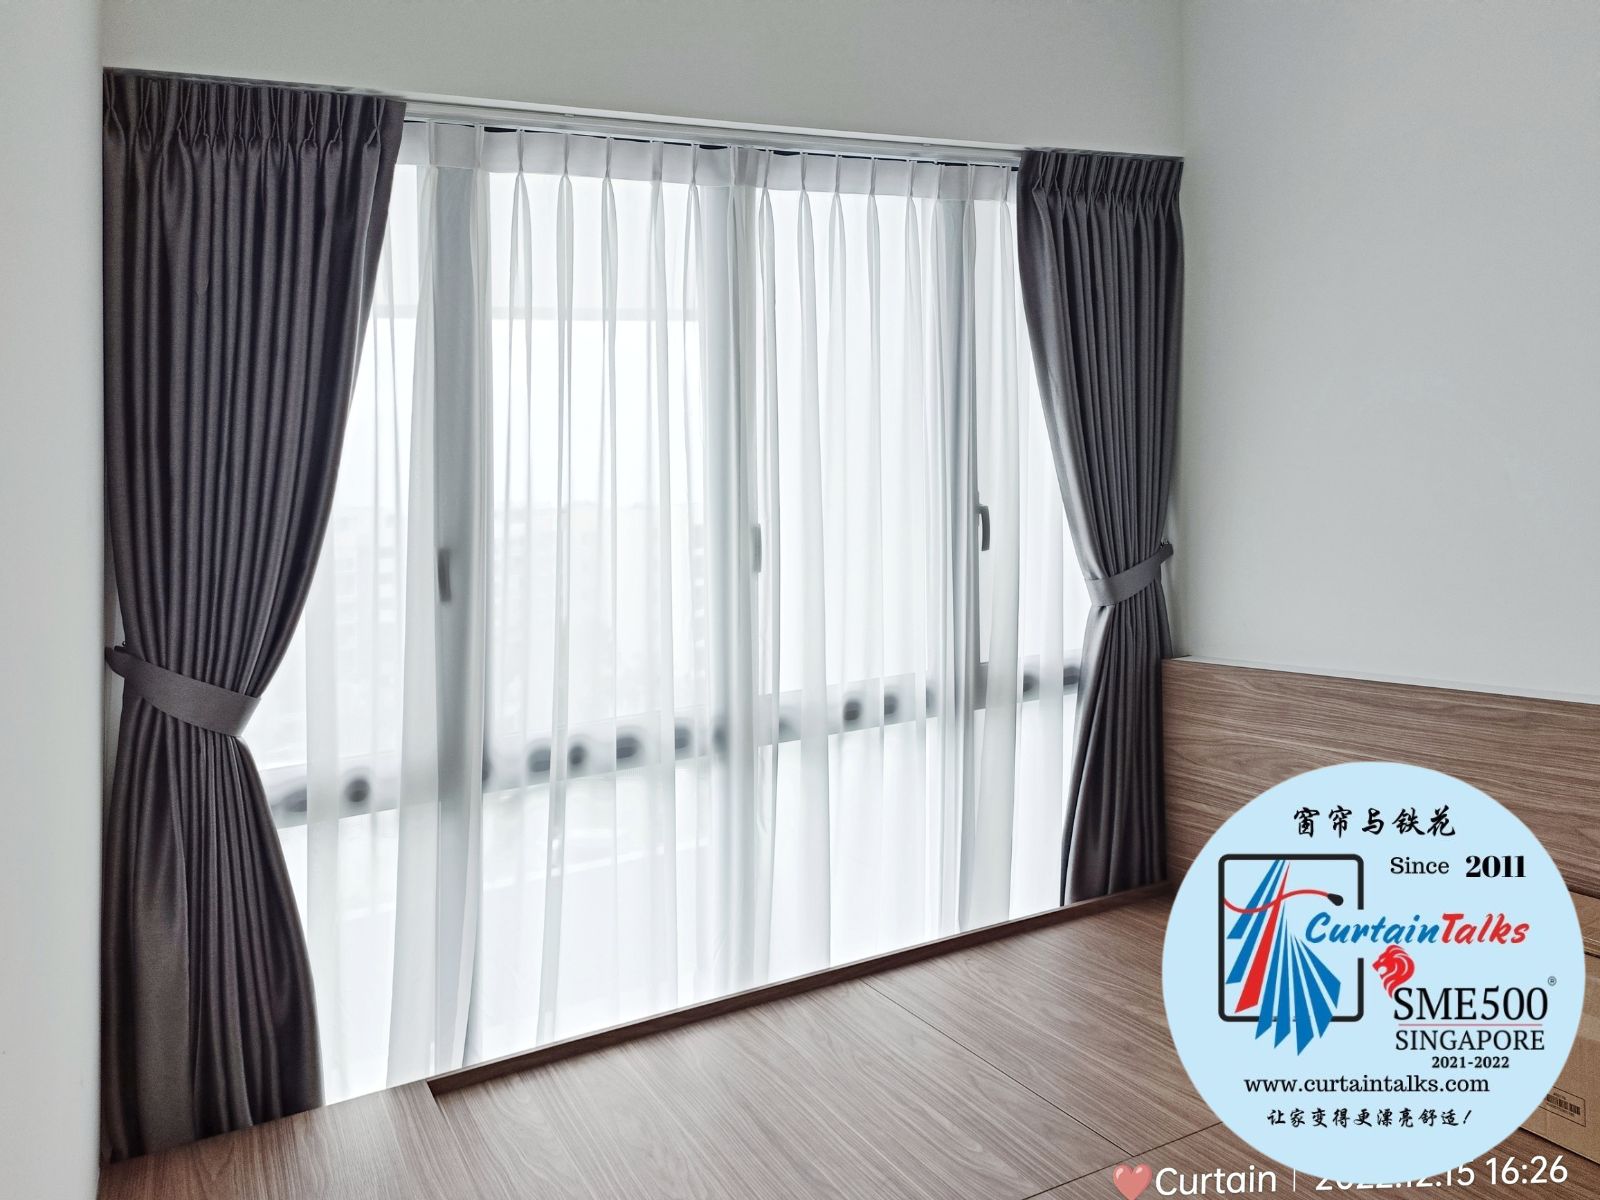 This is a Picture for Day and night curtain for bay window installed at Singapore 158 flora road, Ballot Park Condo